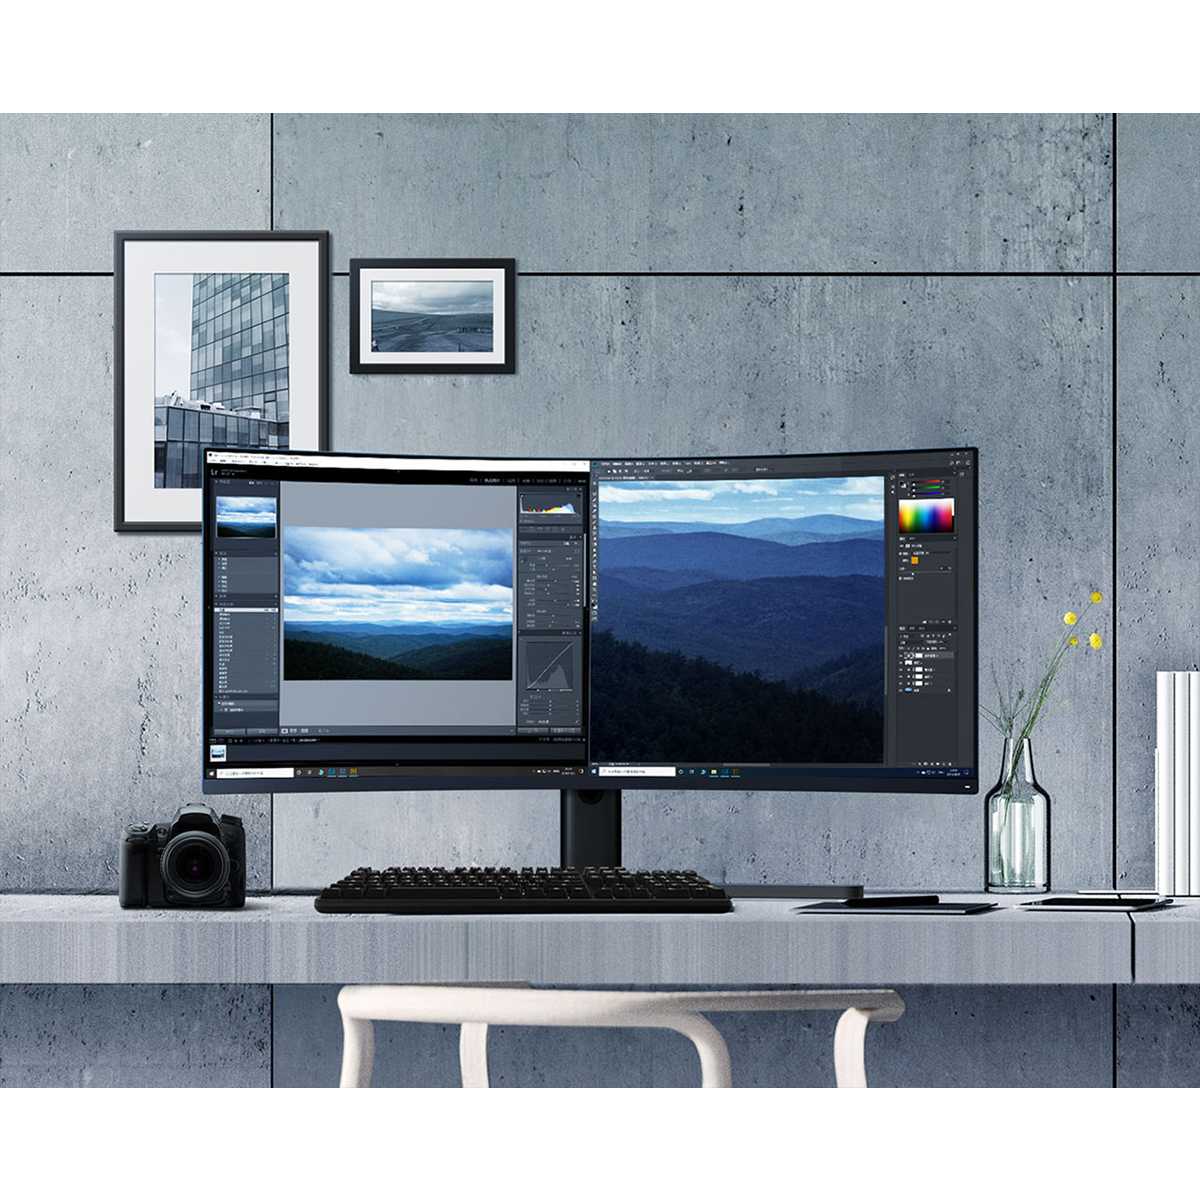 XIAOMI Curved Gaming Monitor 34-Inch